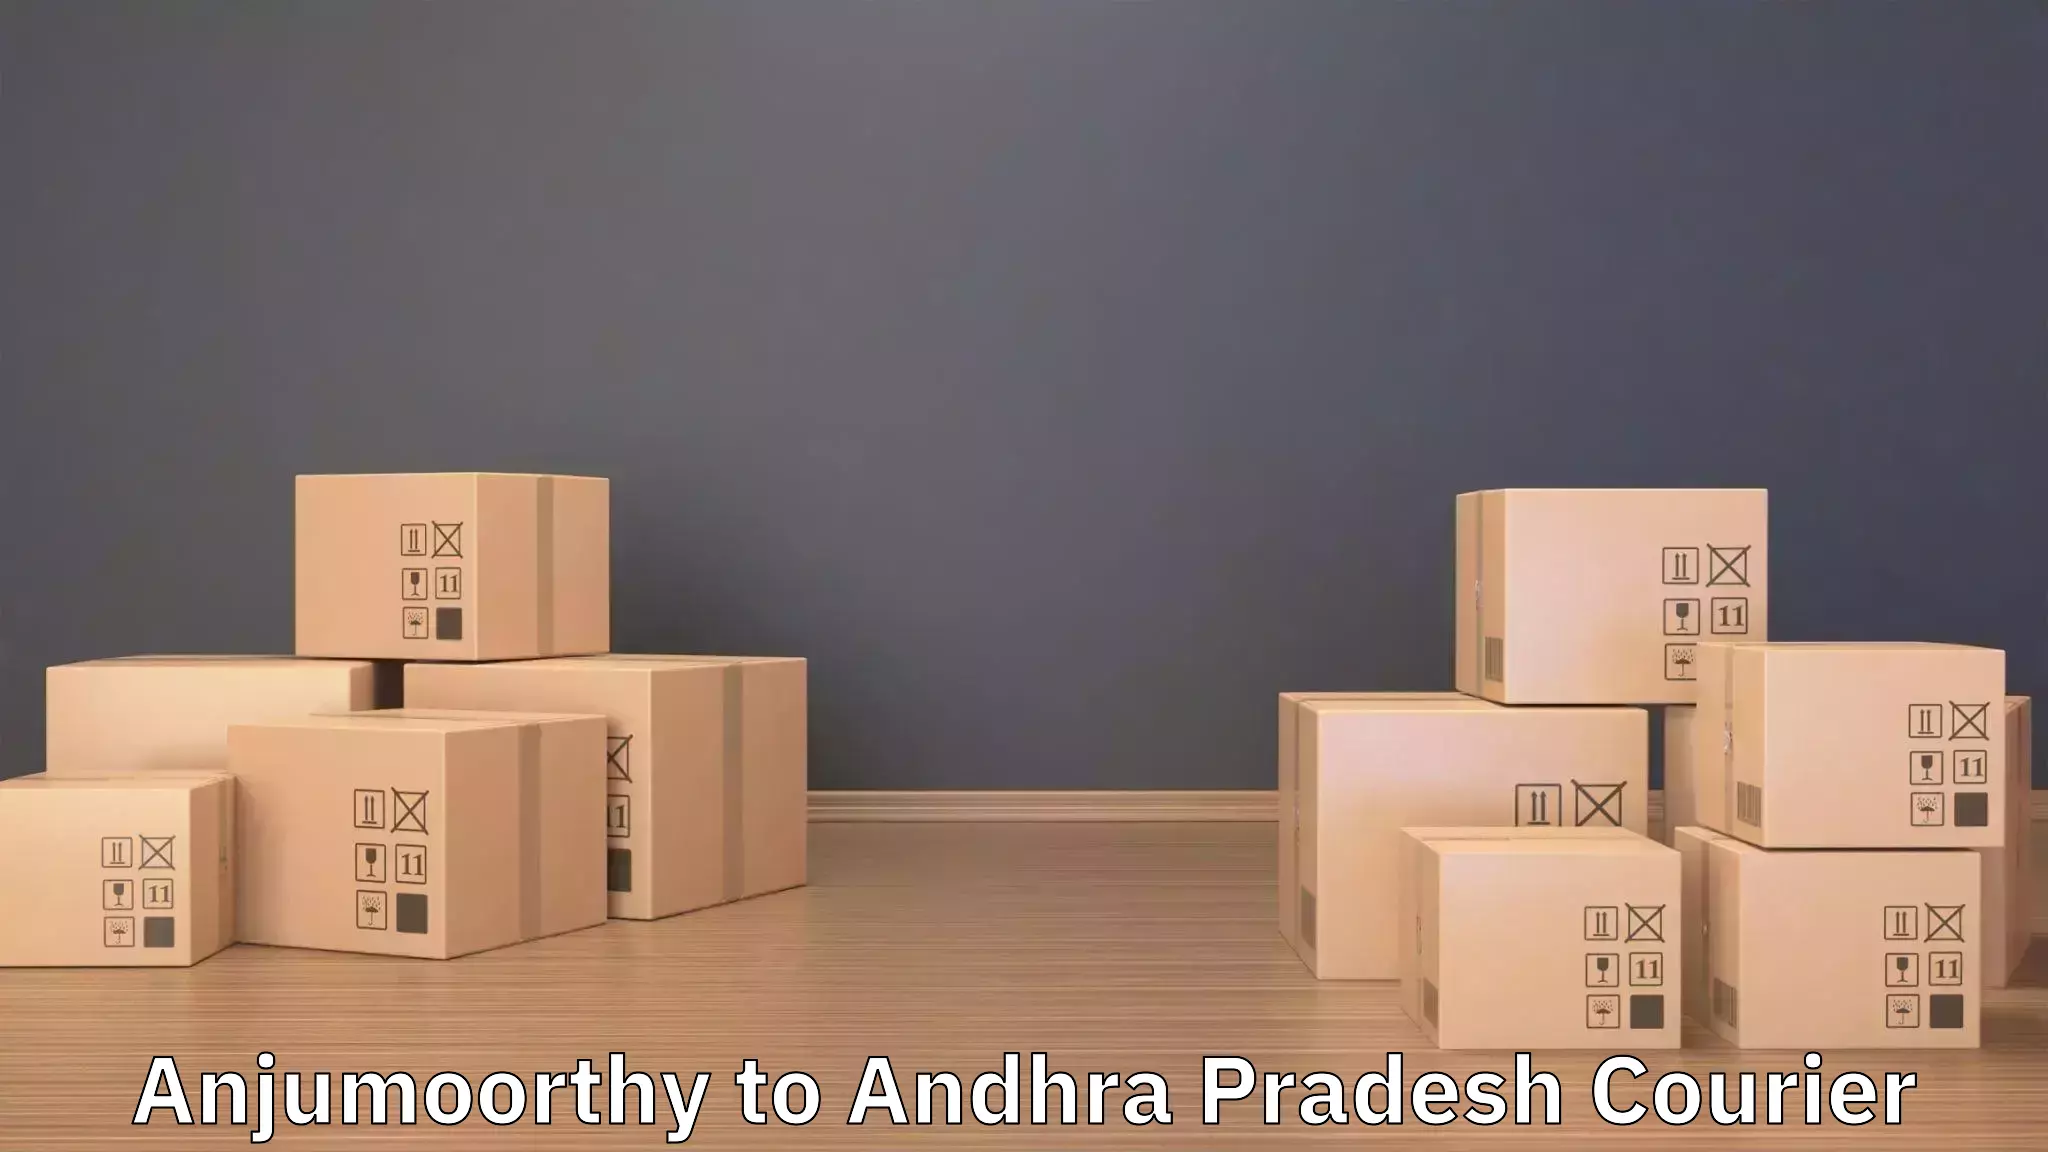 Hassle-free relocation Anjumoorthy to Gampalagudem